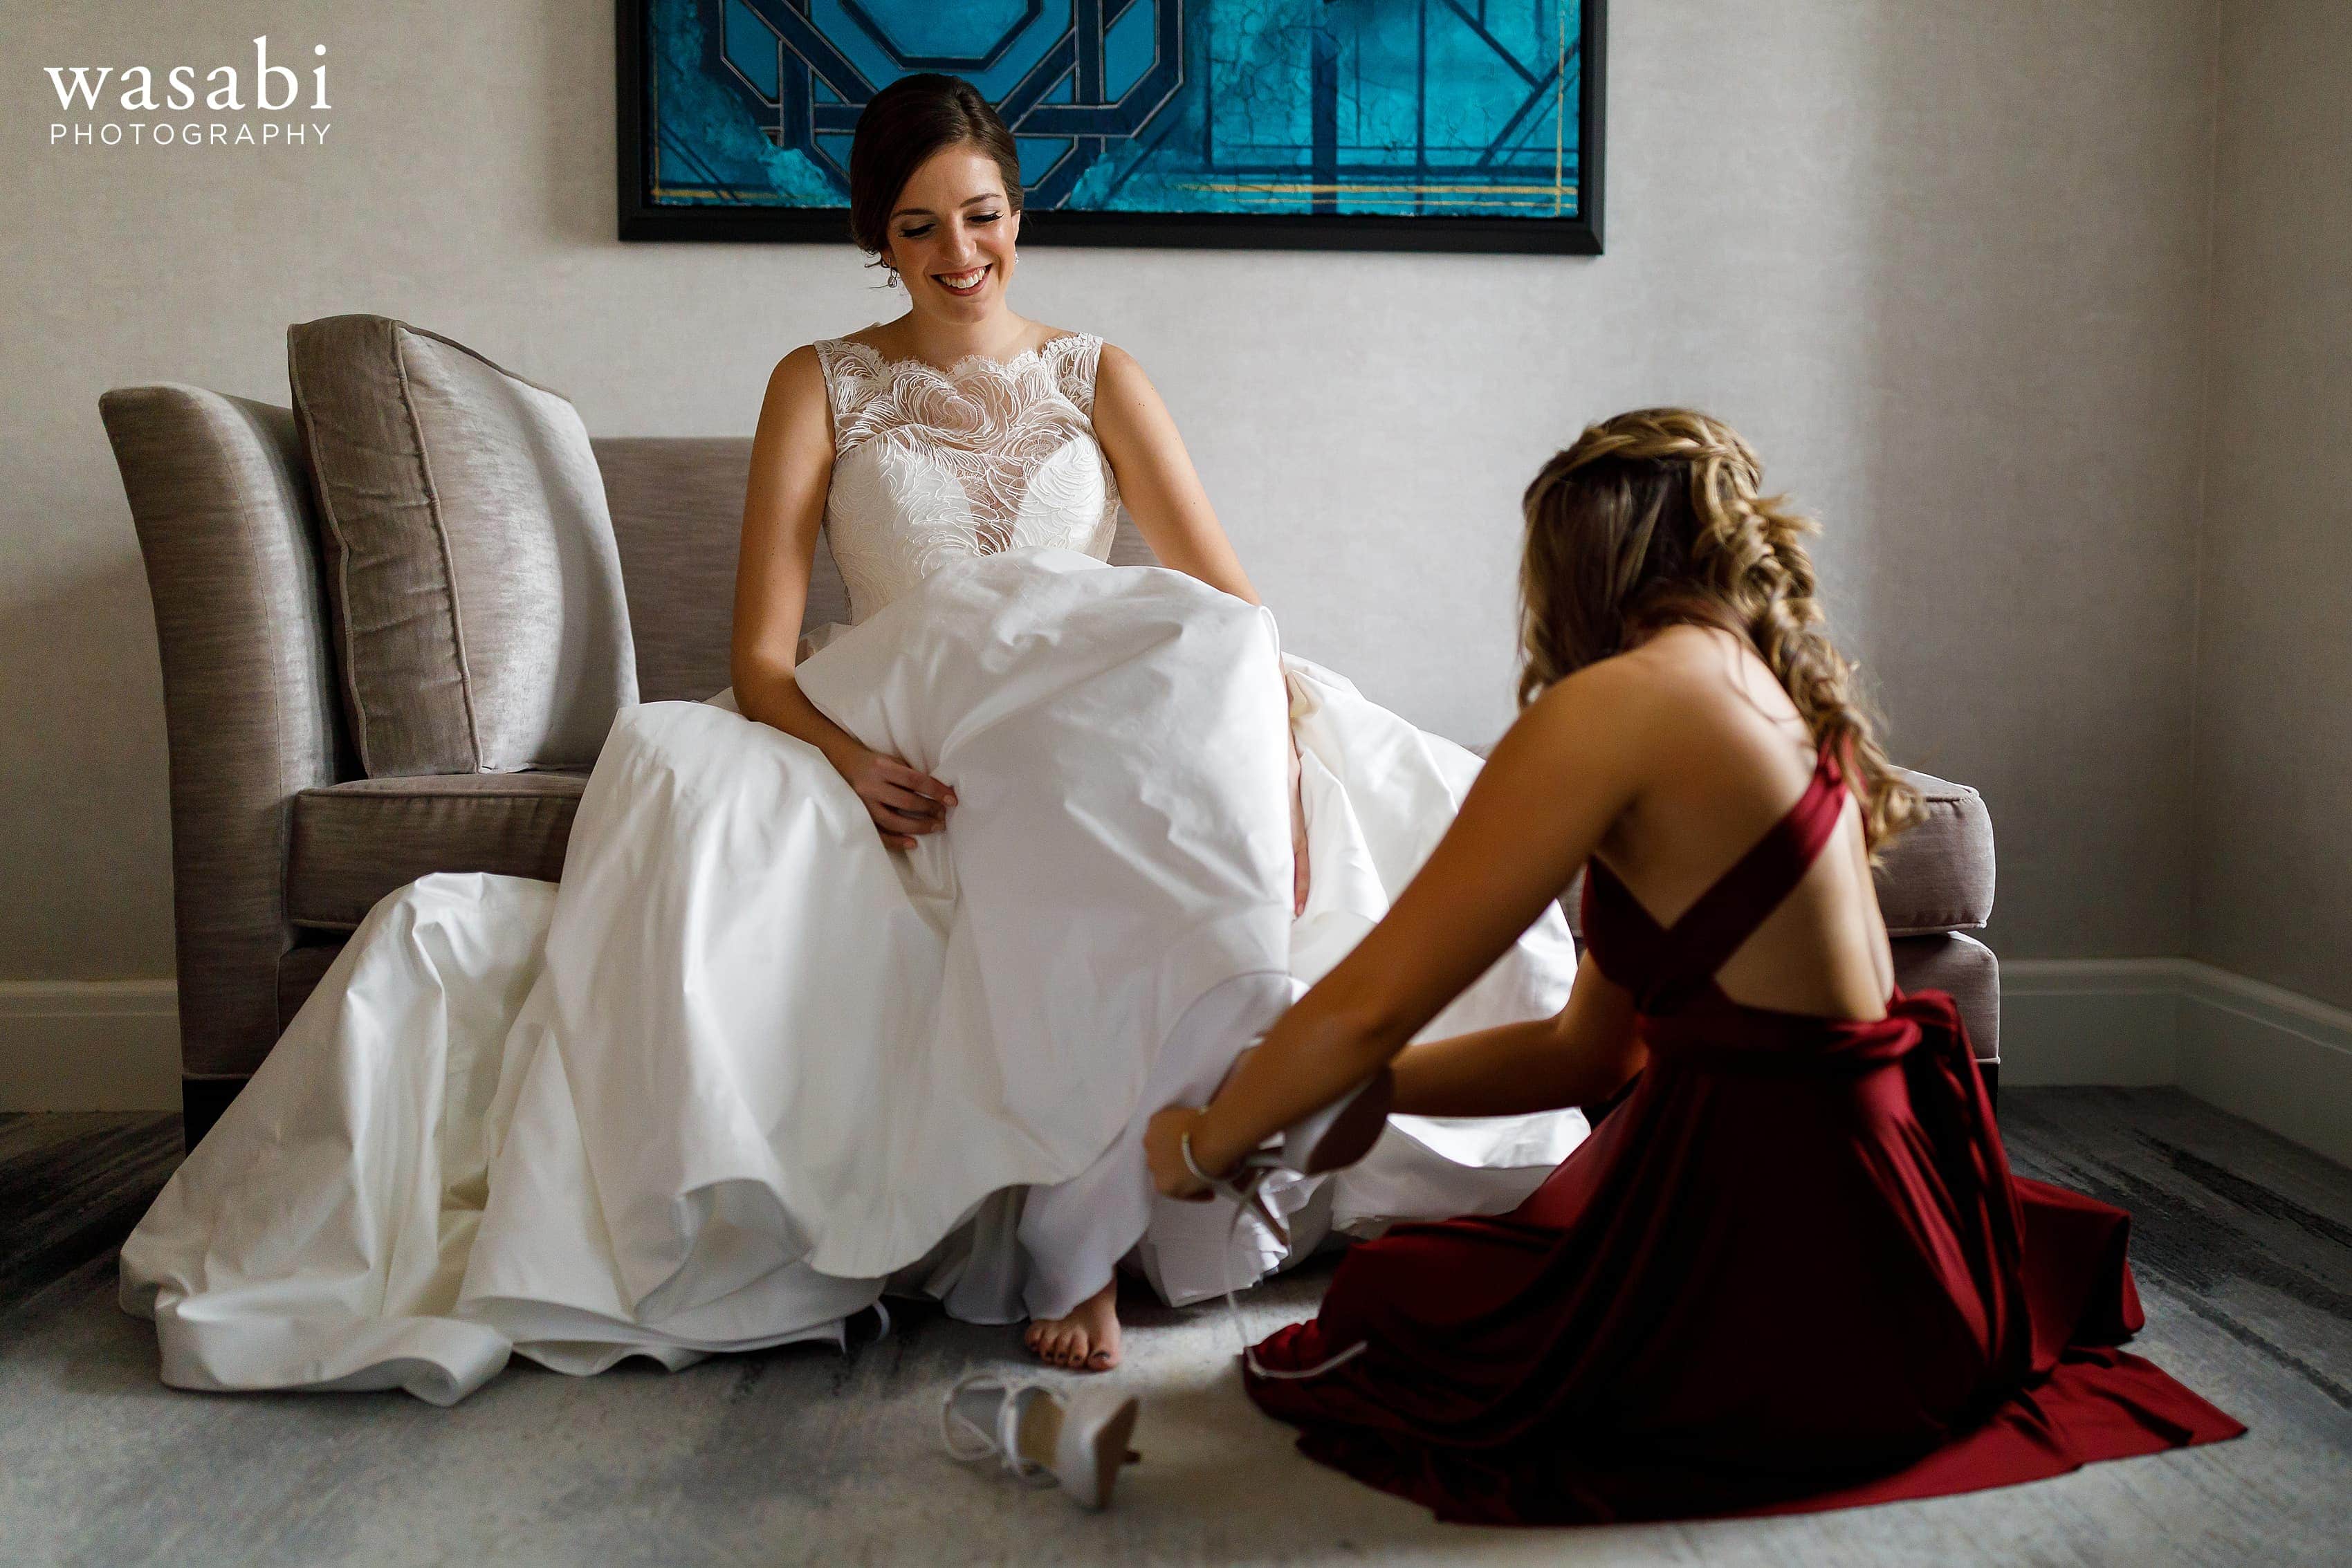 Sister helps bride with shoes while getting ready for wedding in the presidential suite at InterContinental Chicago Magnificent Mile Hotel